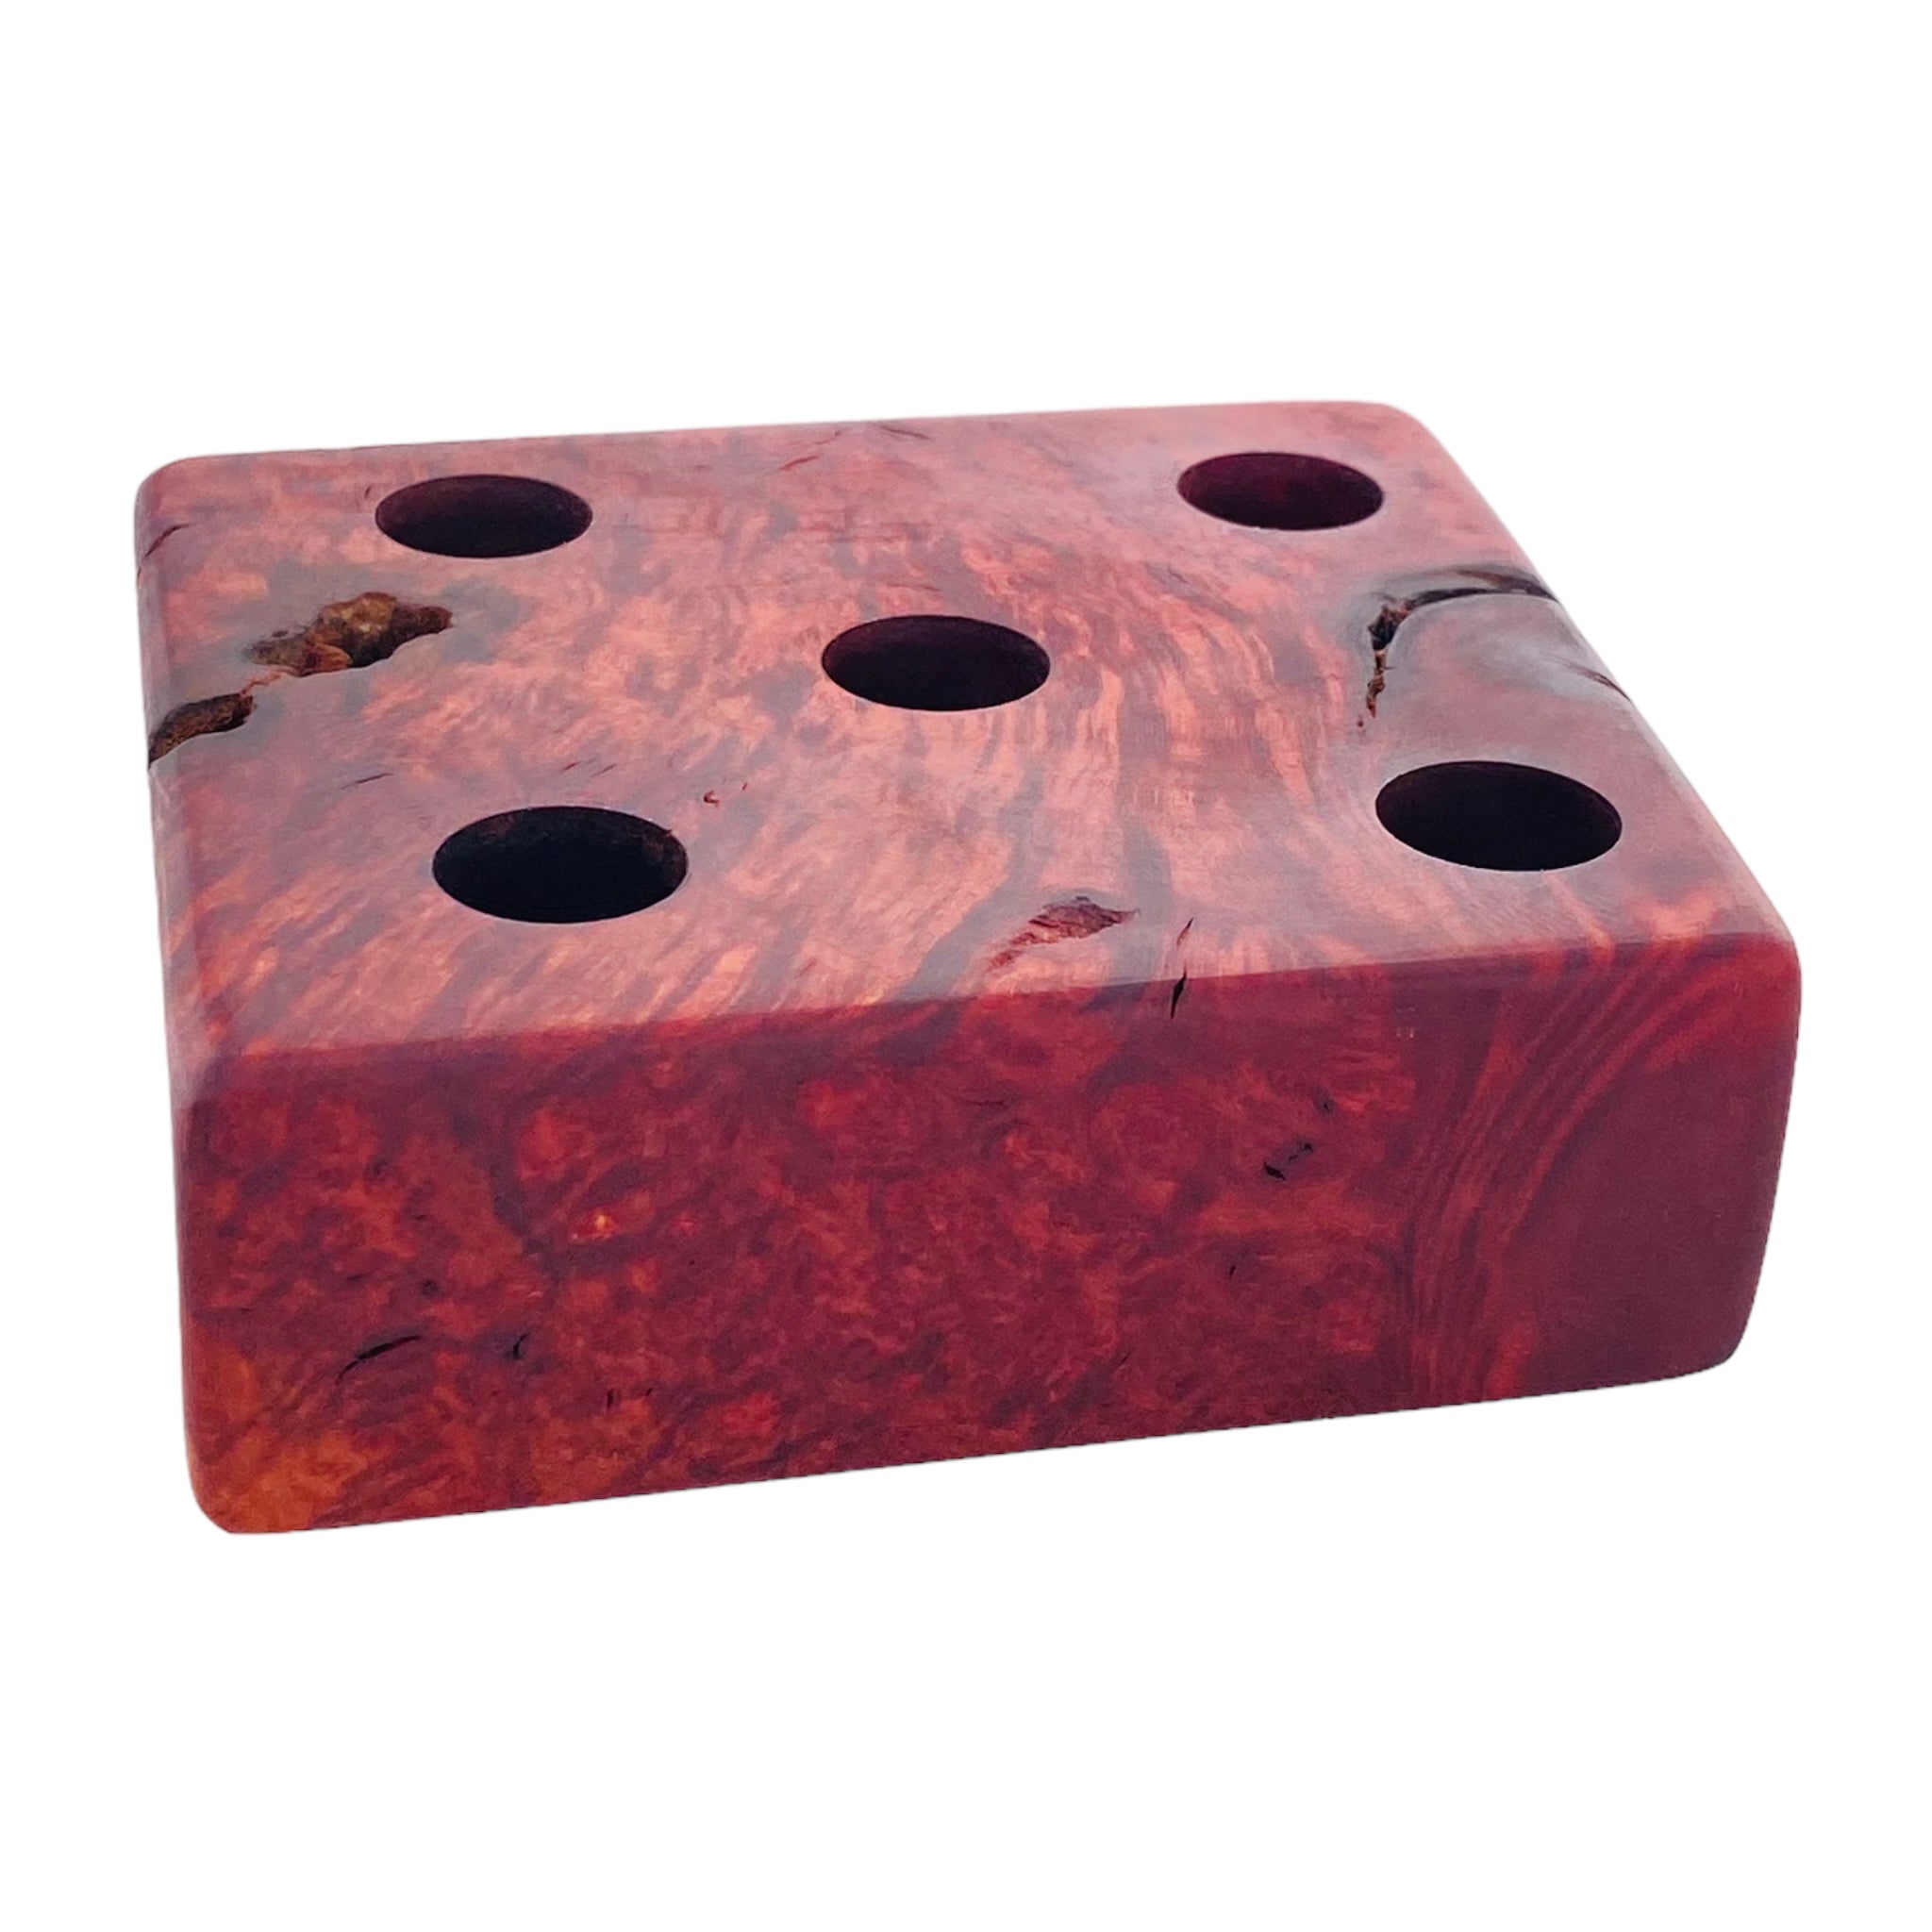 5 Hole Wood Display Stand Holder For 14mm Bong Bowl Pieces Or Quartz Bangers - Manzanita Heart Wood